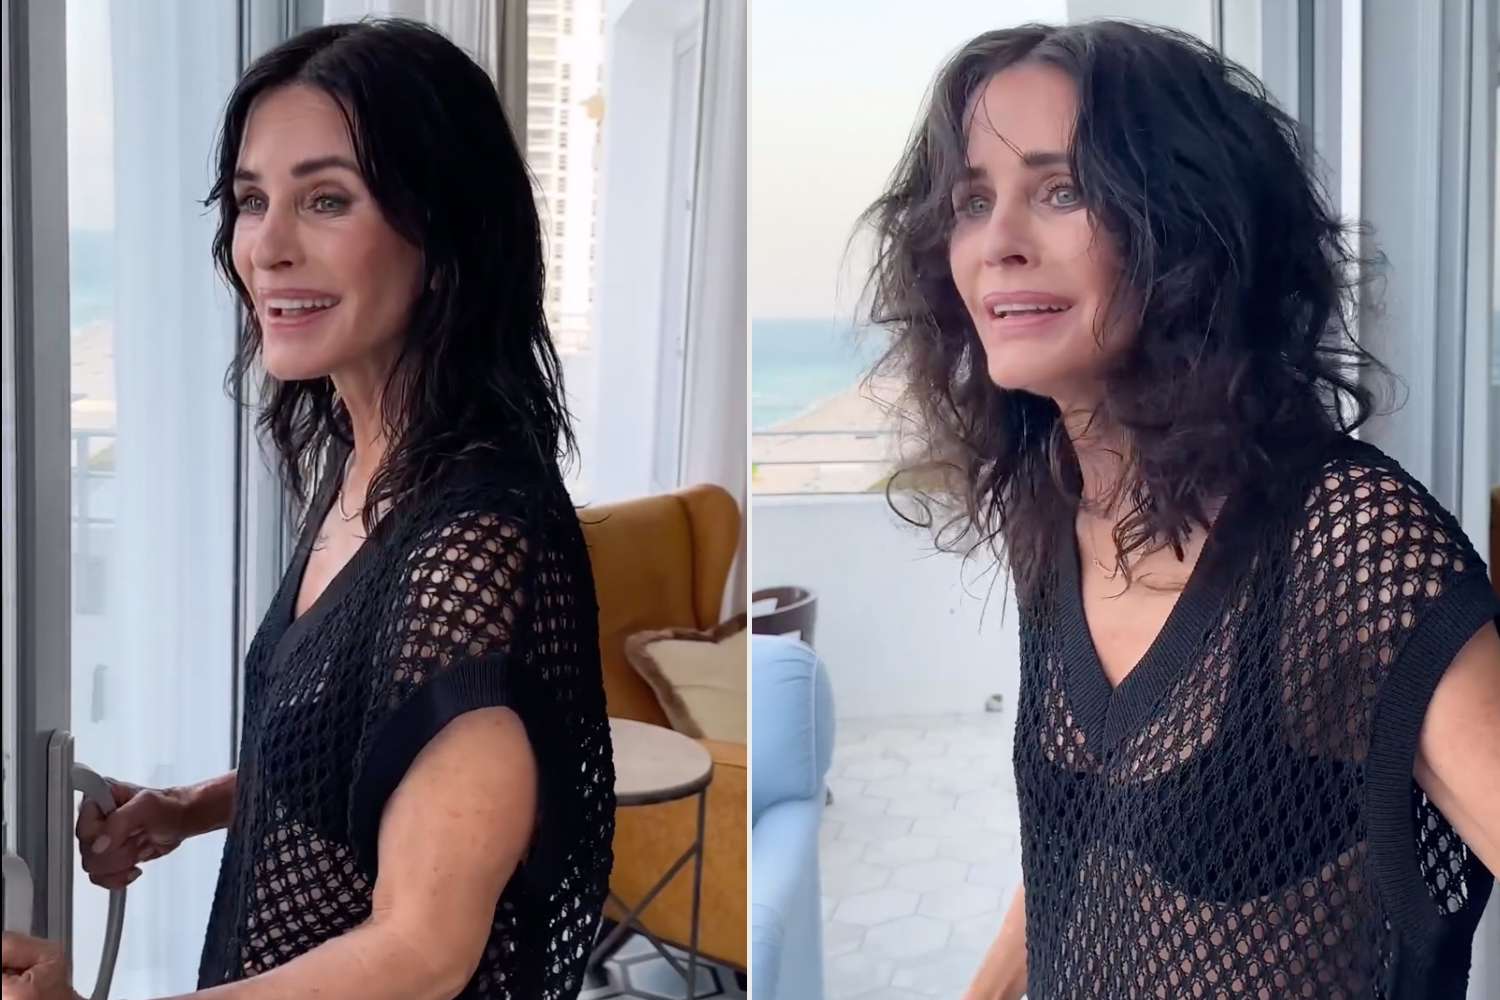 Courteney Cox Makes Fun of Her Humid Miami Hair with Famous Monica Geller Quote